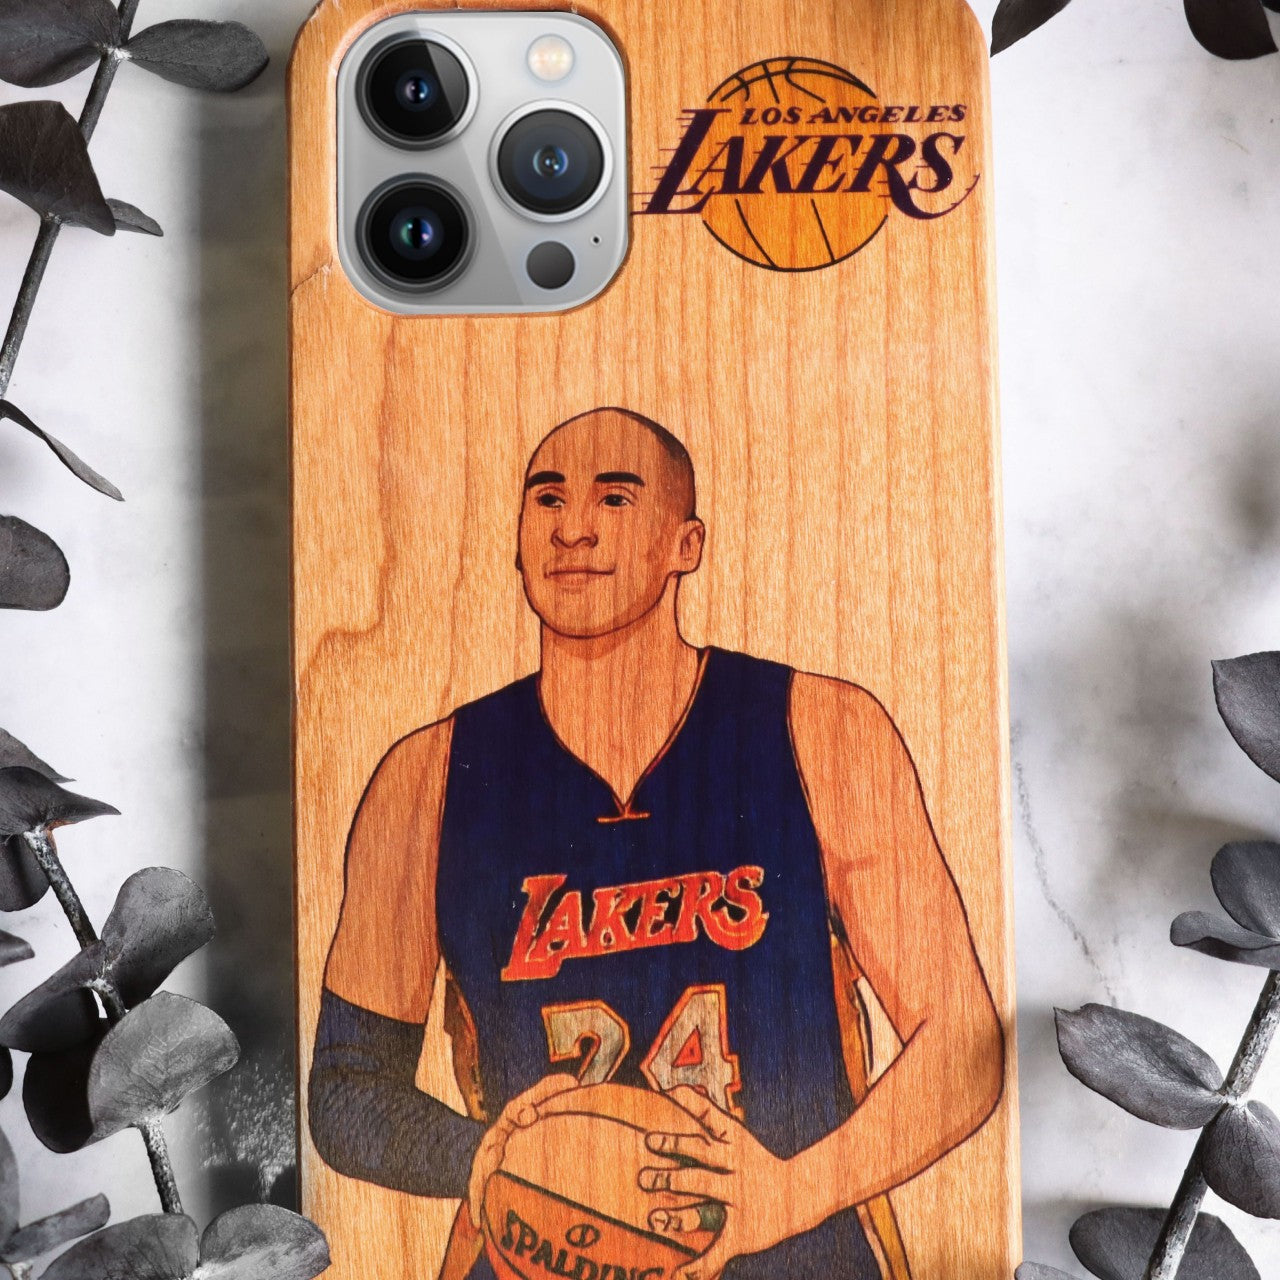 Cartoonify Yourself - Customized Wooden Phone Case